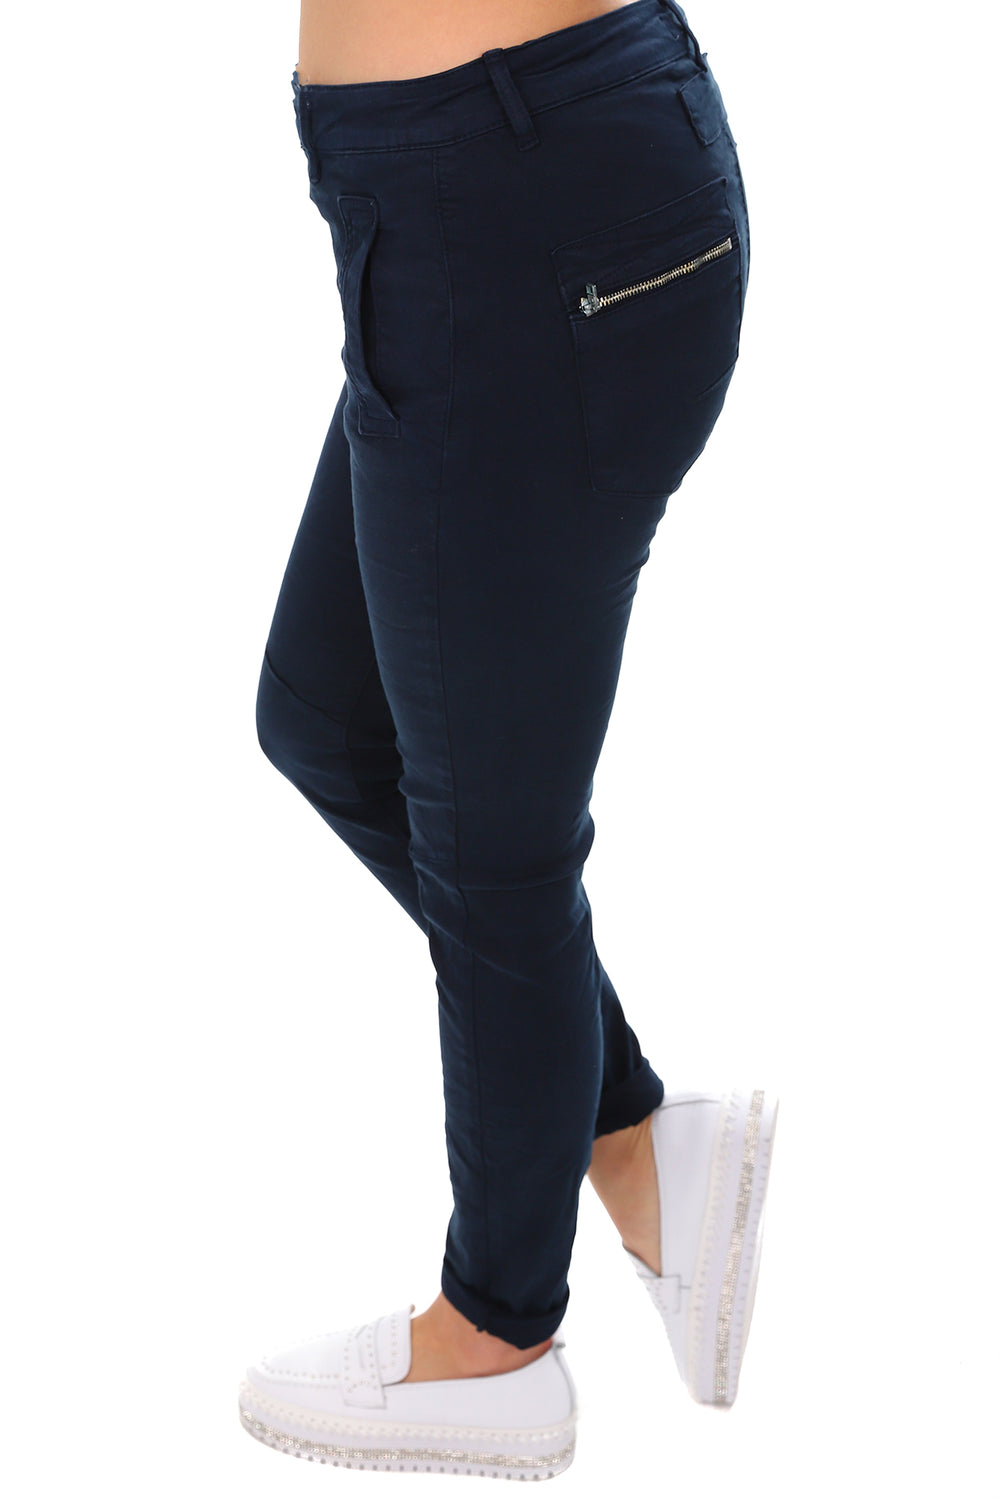 Make a statement with a difference wearing the Classic Button Jeans in Indigo by Italian Star. These denim jeans double as a casual and smart pant with an added touch of Pizazz through the zip and button detail. With a mid rise waist, pockets and tapered leg these pants are going to fit you to perfection! Brand: Italian Star Style Code: 8123 Colour: Indigo Material: 98% Cotton 2% Elastane Care: Machine wash Zip and button fly front Side pockets Zip back pockets Seam detail at knees Designed to fade